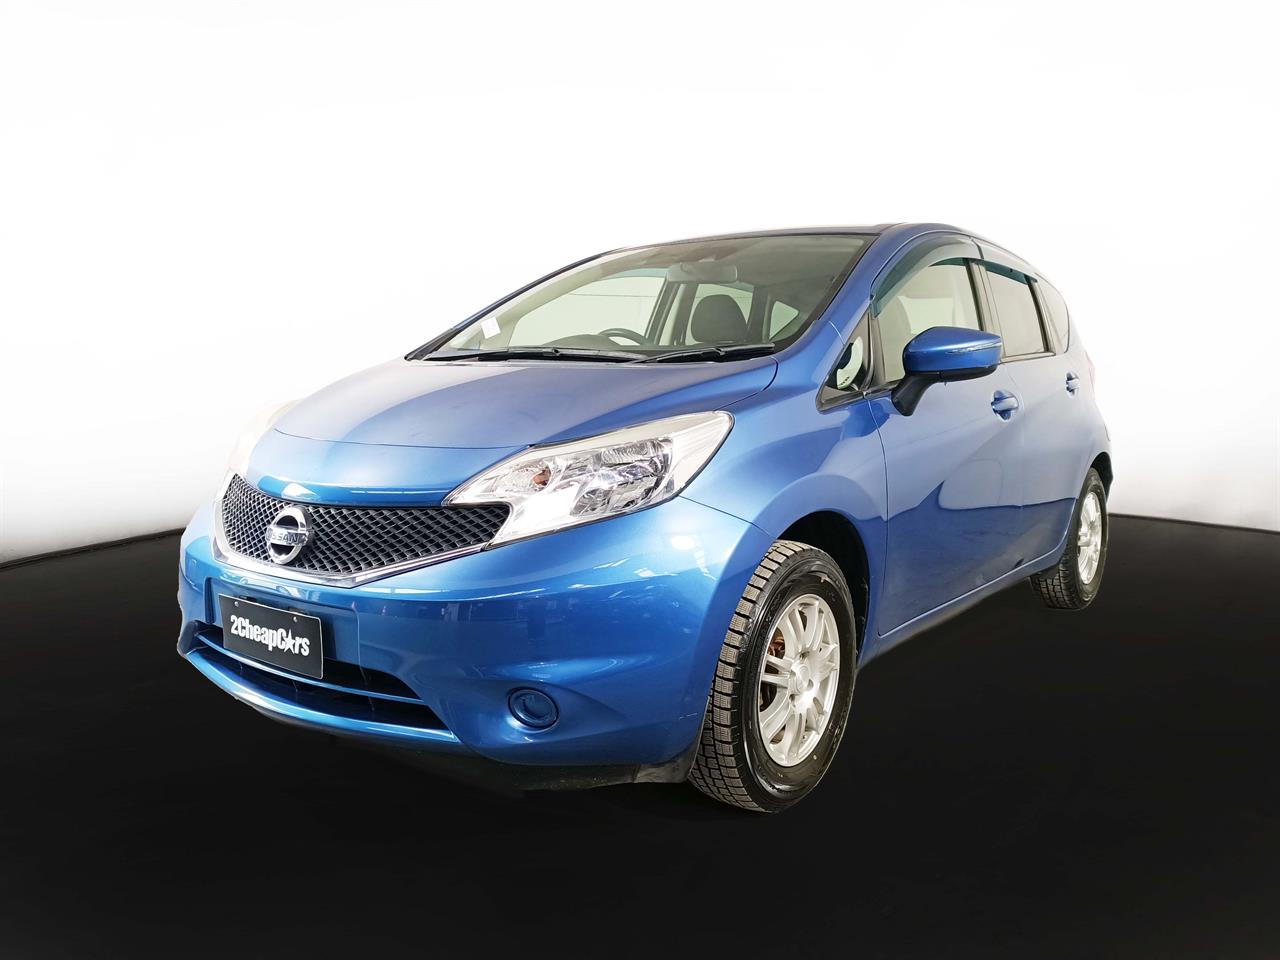 2016 Nissan Note 